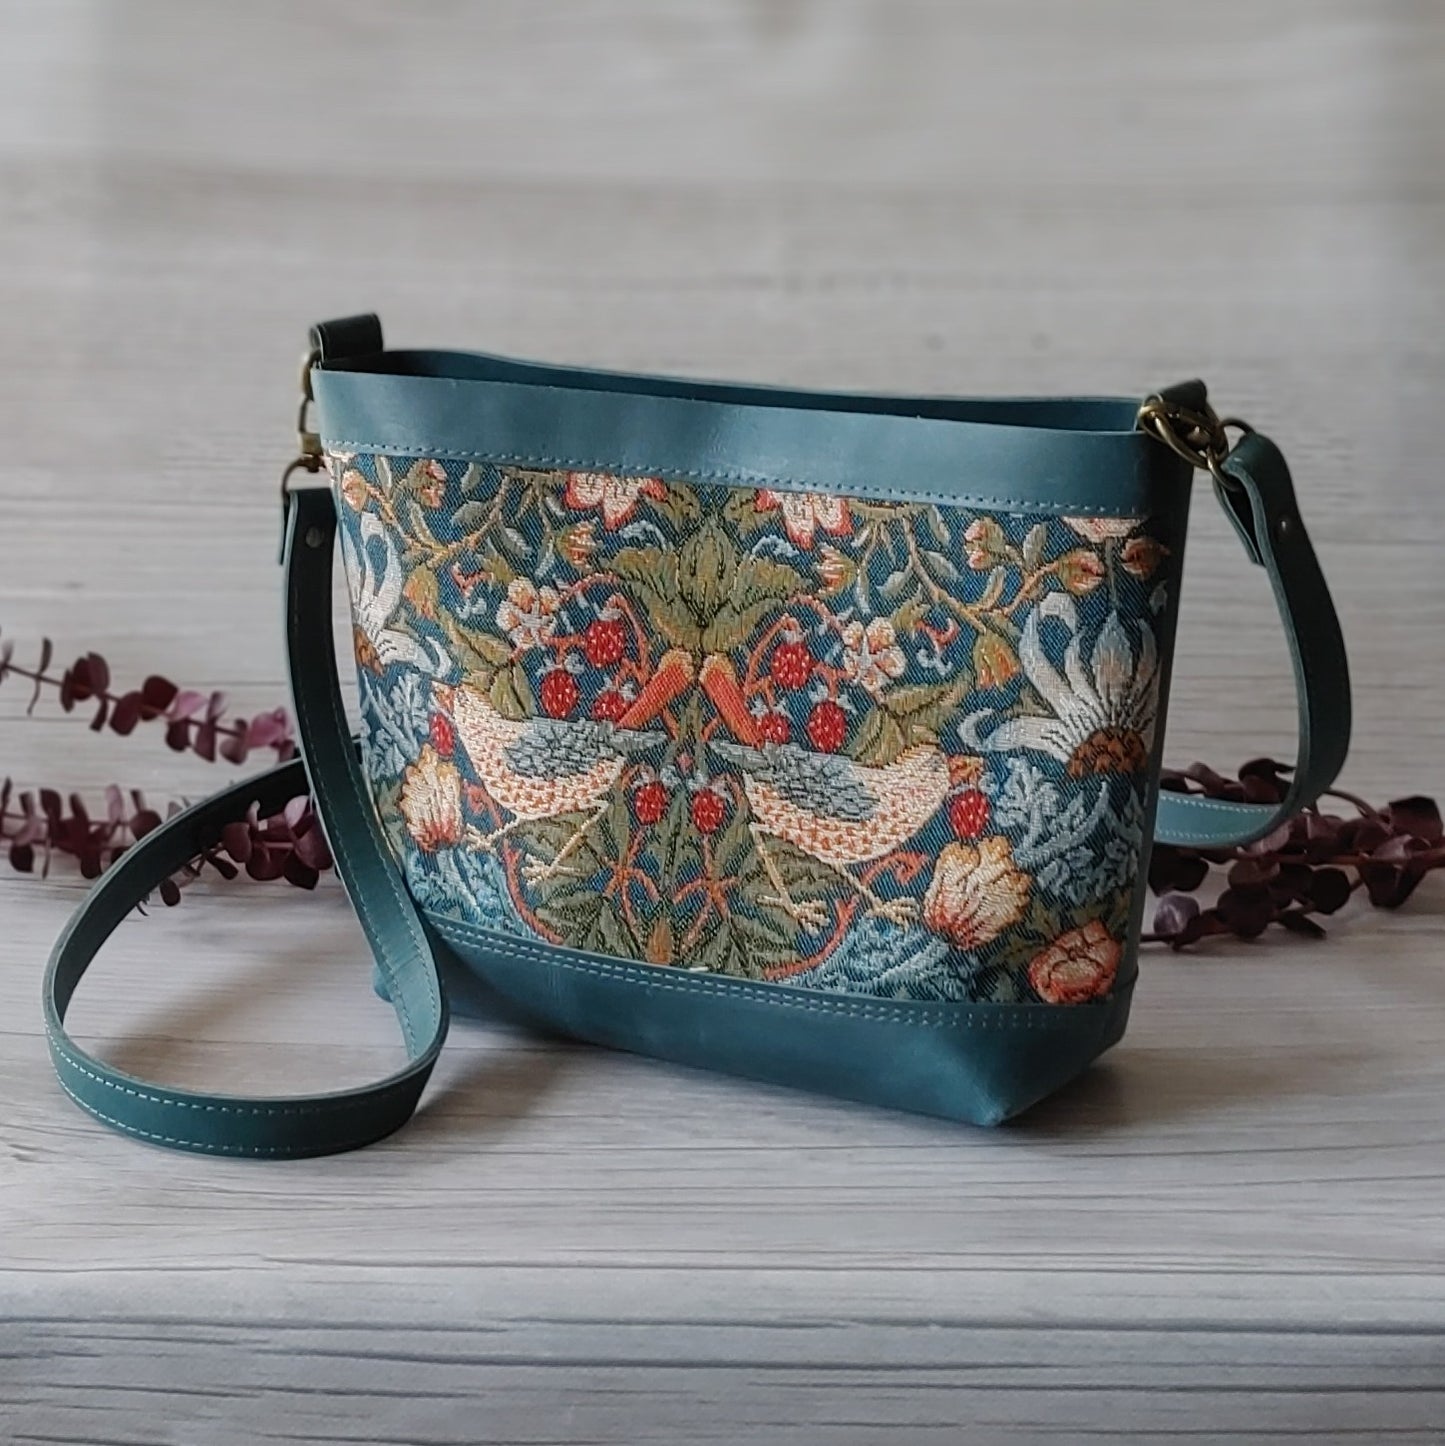 Handbag in leather with panel of Strawberry Thief by William Morris tapestry. Made in Canada by Plumage Studio Accessories